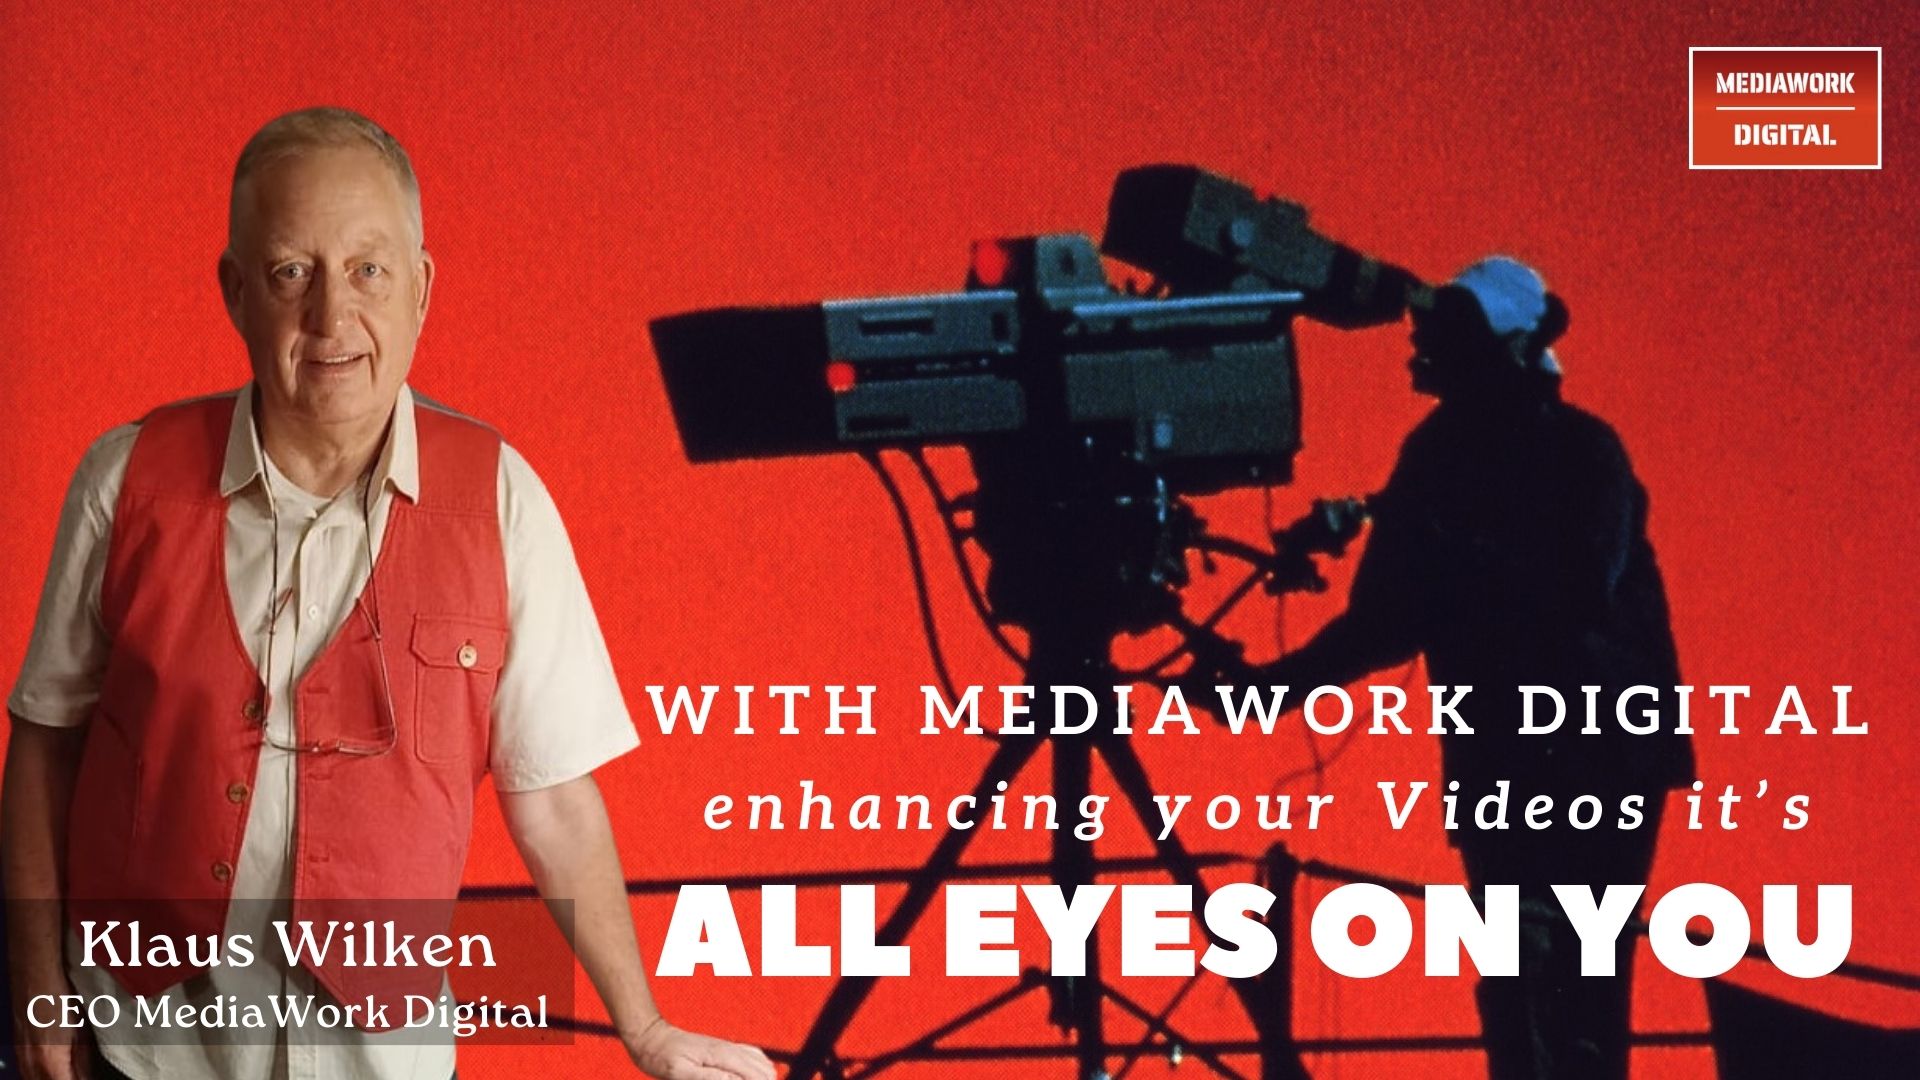 Video Marketing and database marketing is what MediaWork Digital offers to do for every budget